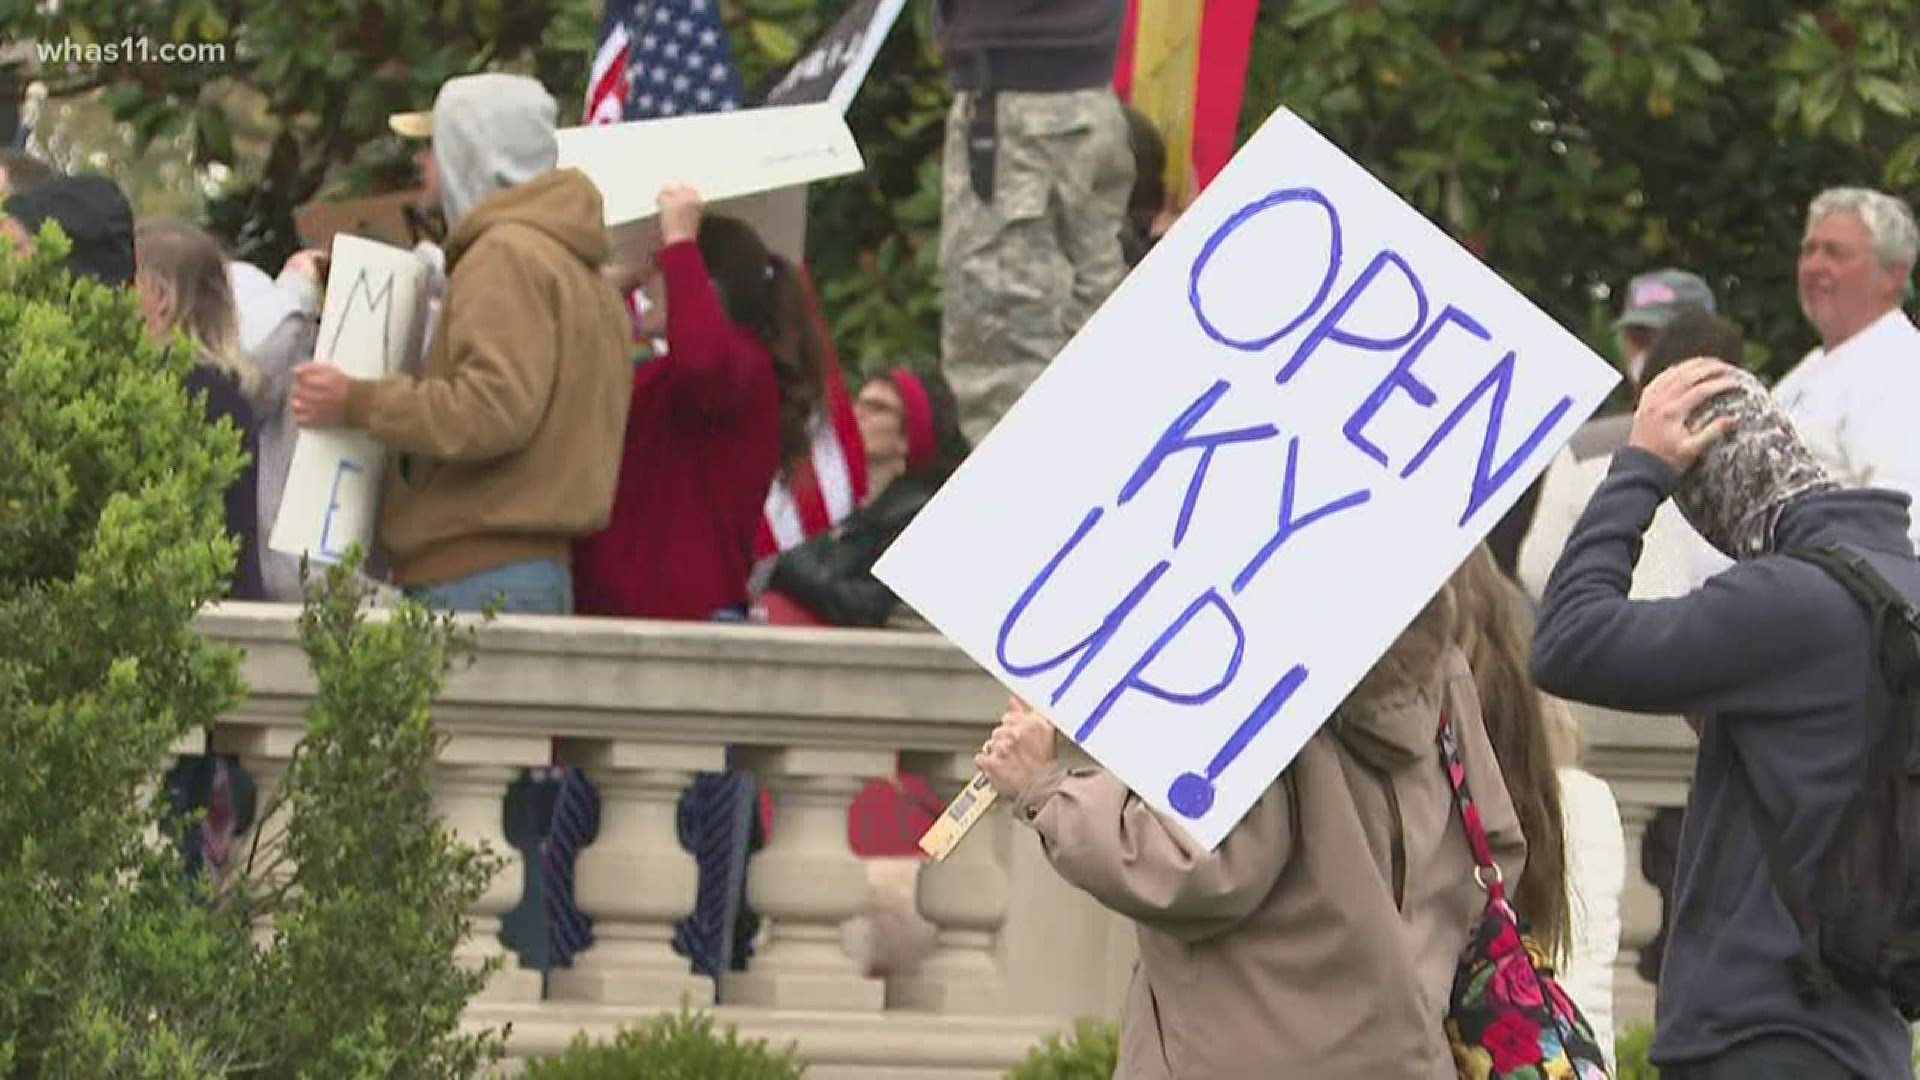 A large group of protestors demanded Kentucky reopen for business.